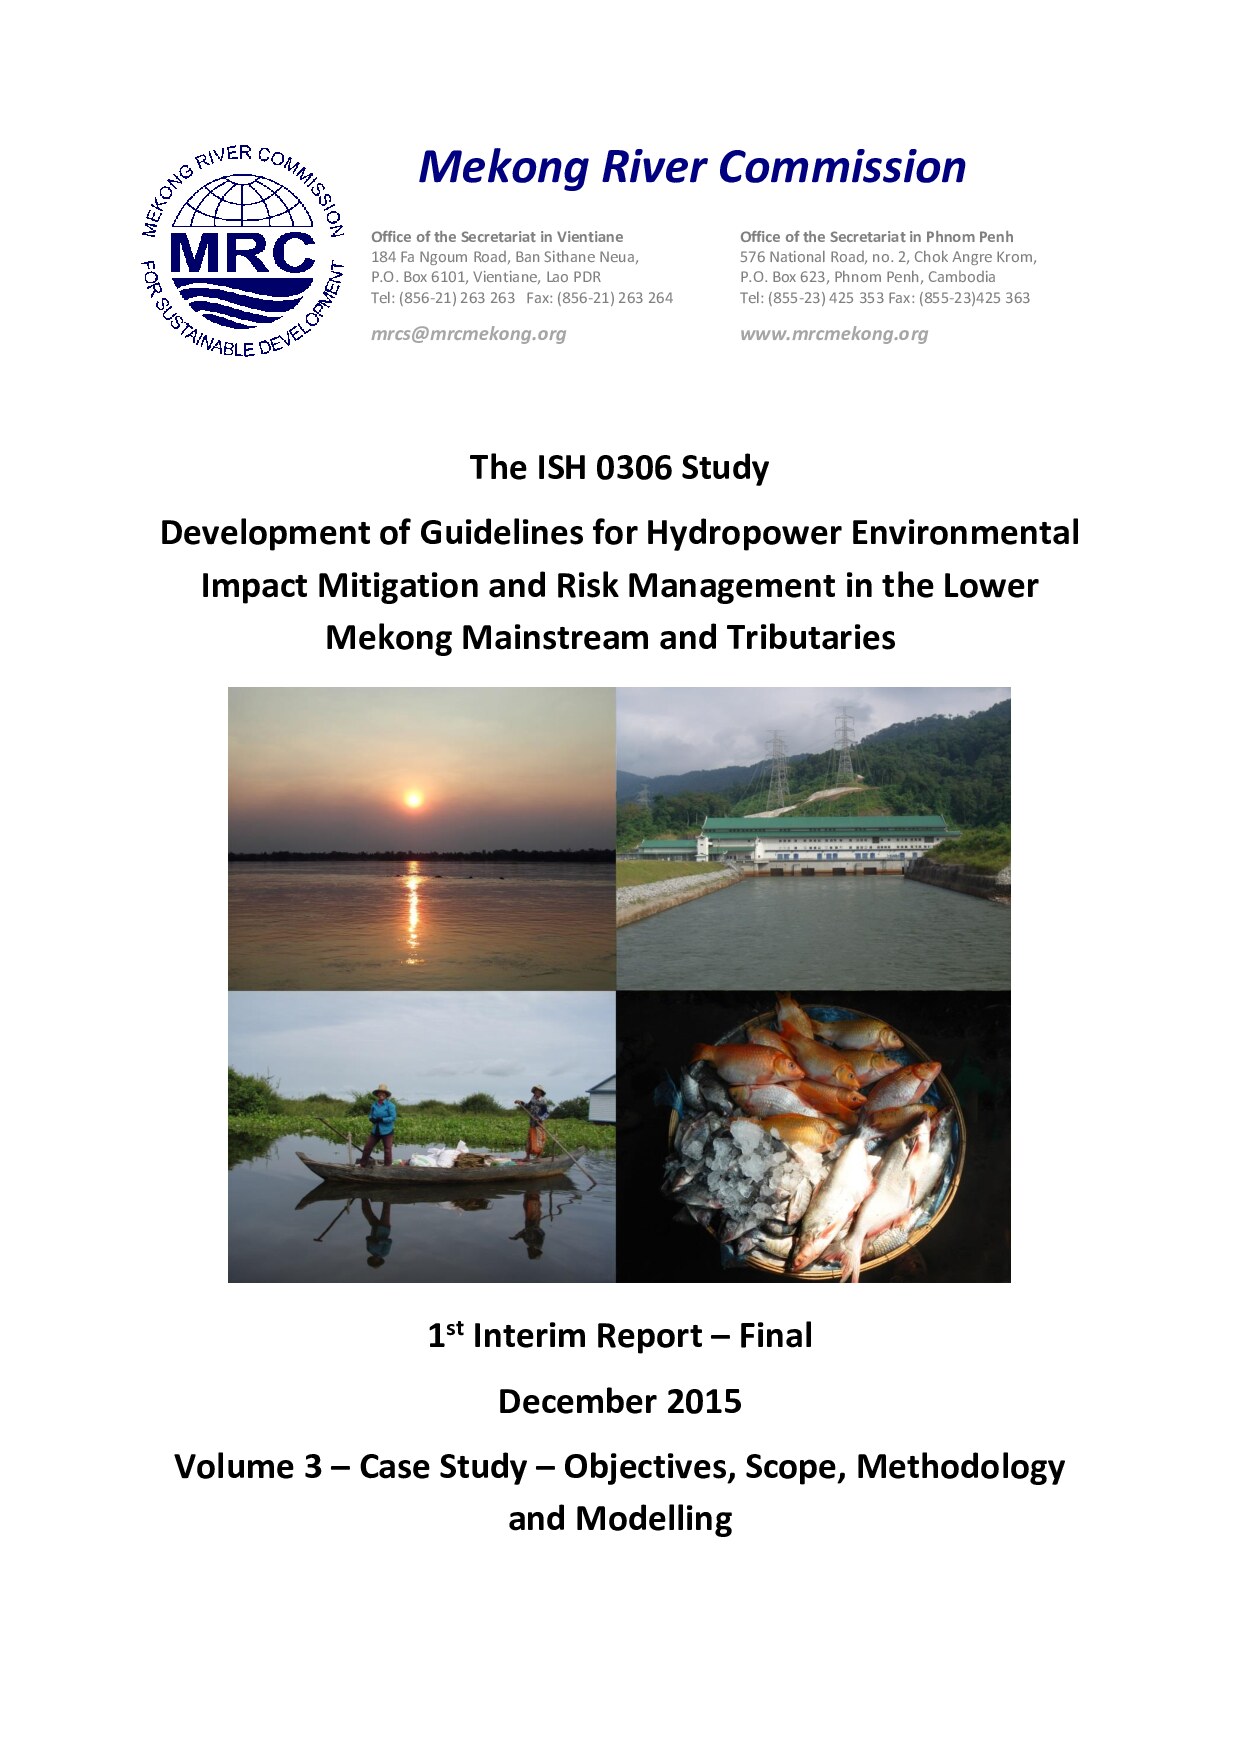 Development of Guidelines for Hydropower Environmental Impact Mitigation and Risk Management in the Lower Mekong Mainstream and Tributaries 1st Interim Report – Final: Vol.3 – Case Study